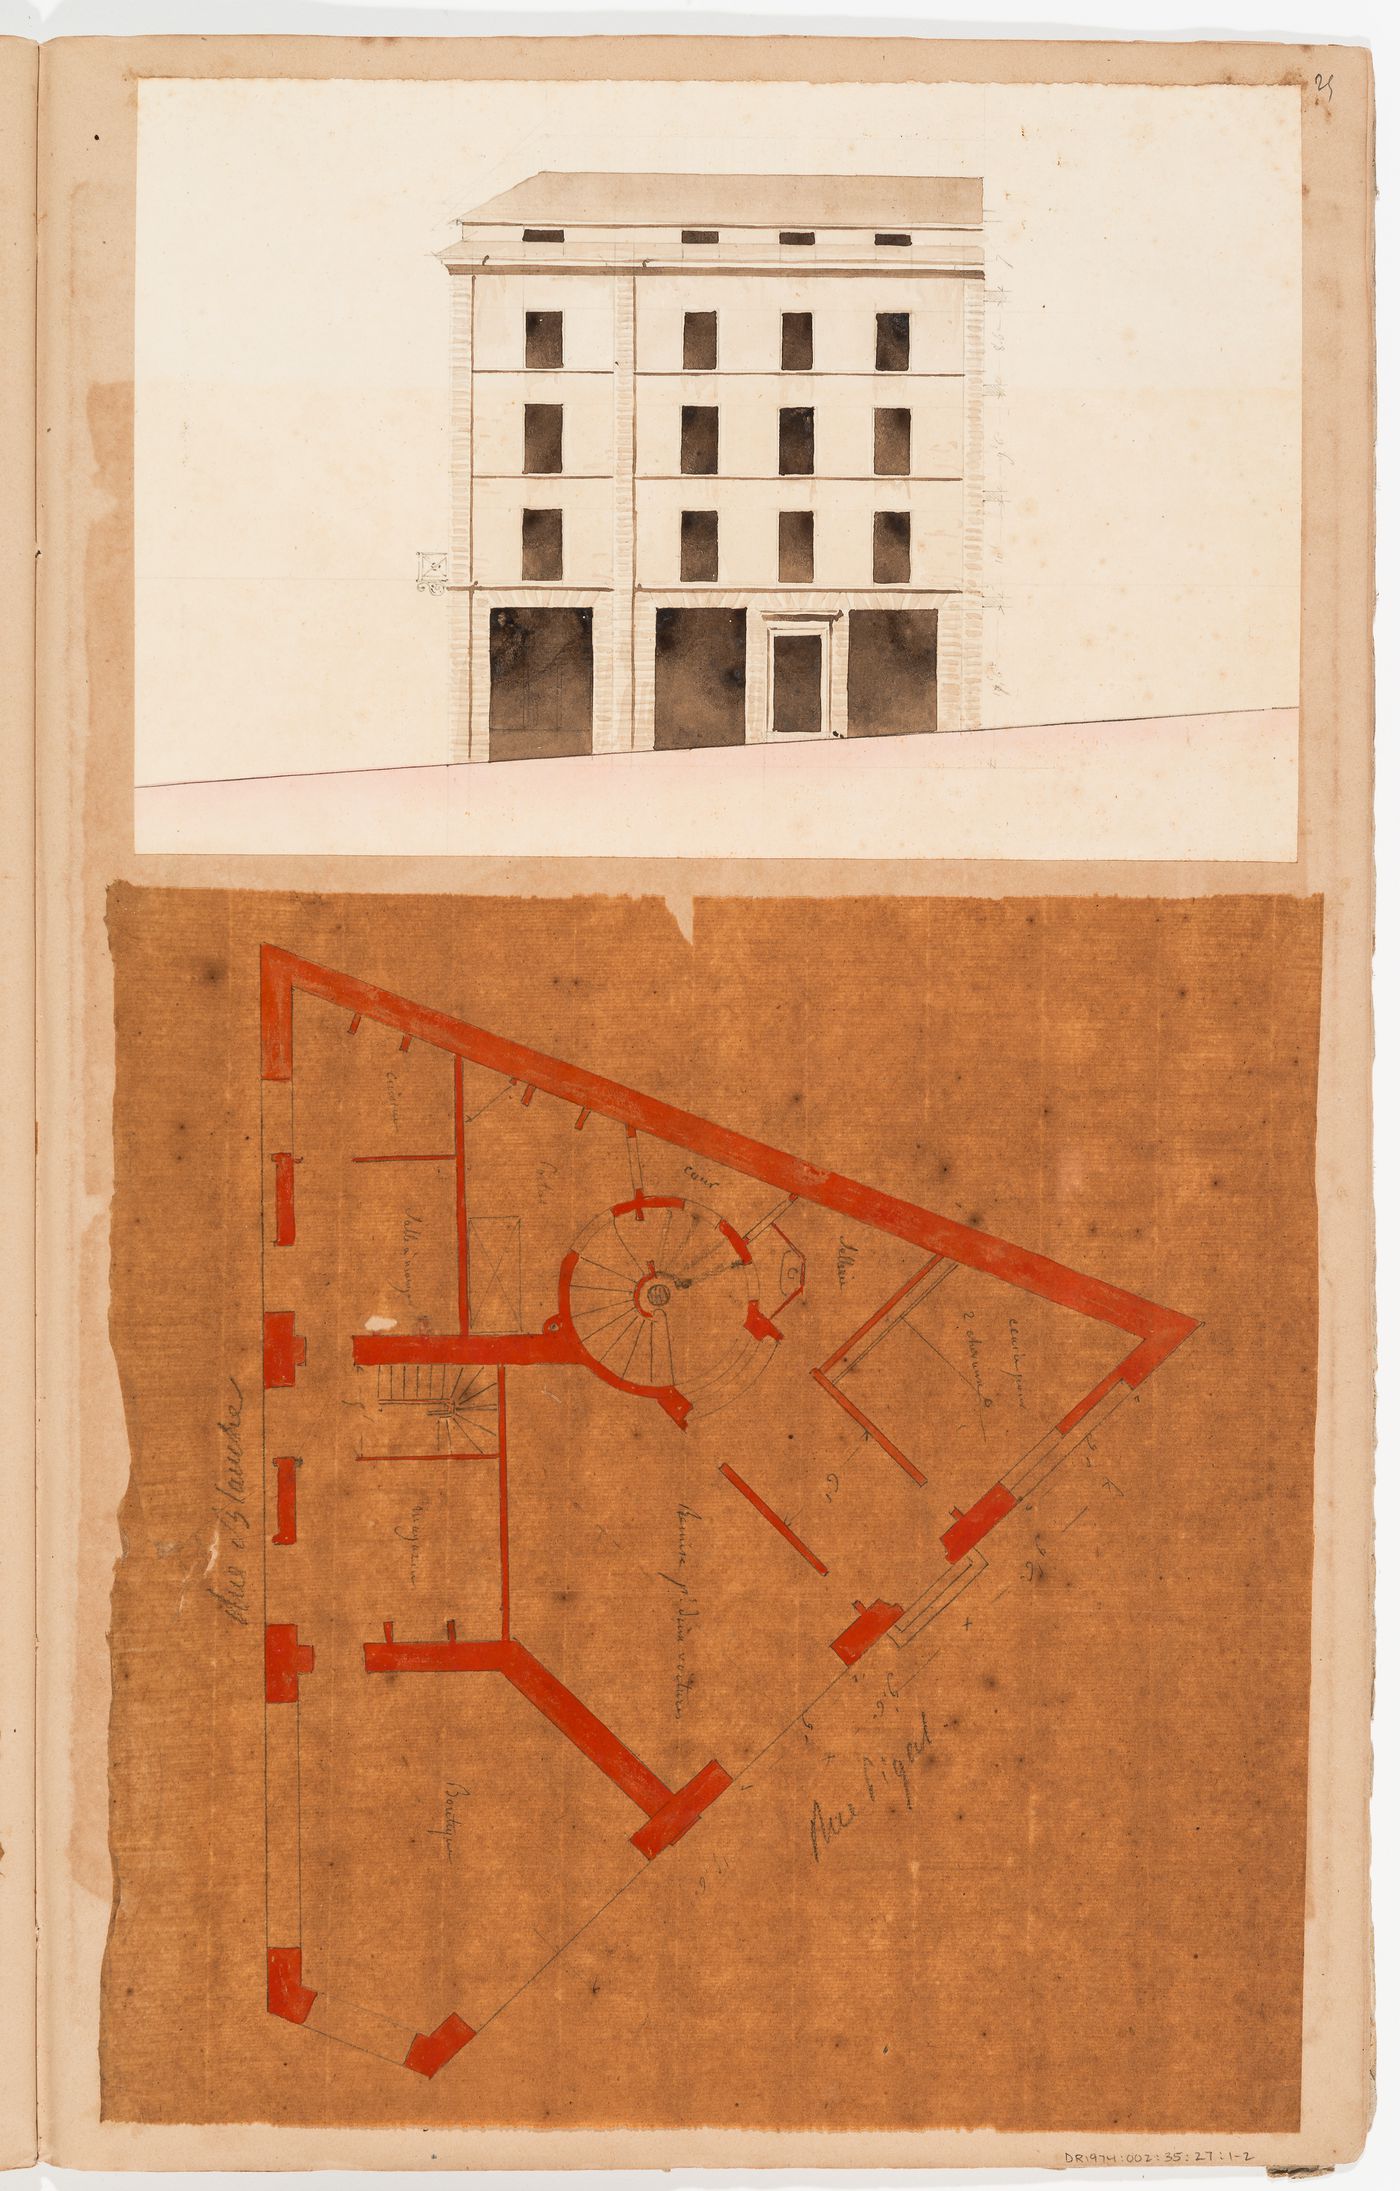 Elevation and ground floor plan for a house at the corner of rue de la Blanche and rue Pigalle, Paris